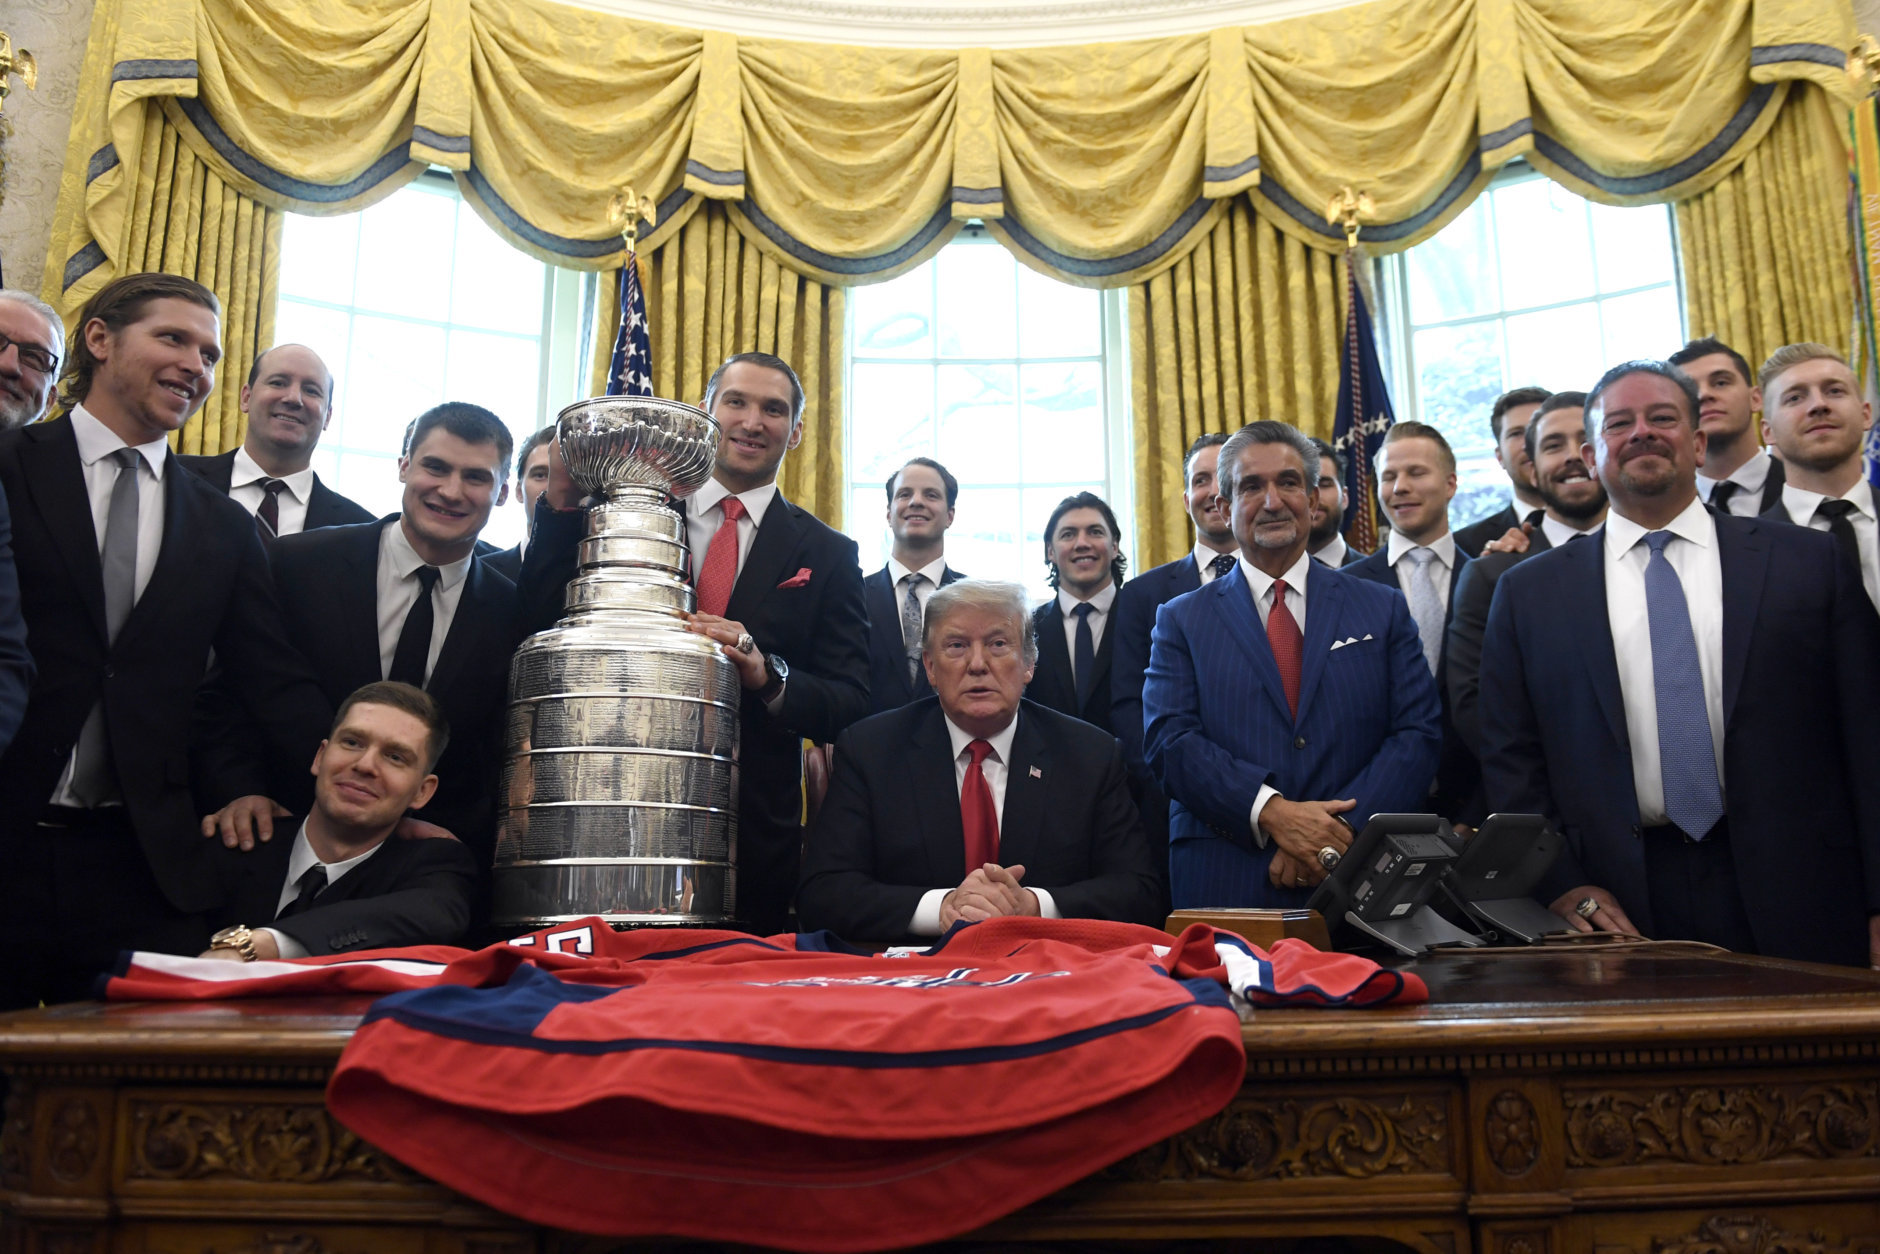 President Donald Trump, center, poses for a photo as he hosts the 2018 Stanley Cup Champion Washington Capitals hockey team in the Oval Office of the White House in Washington, Monday, March 25, 2019. (AP Photo/Susan Walsh)